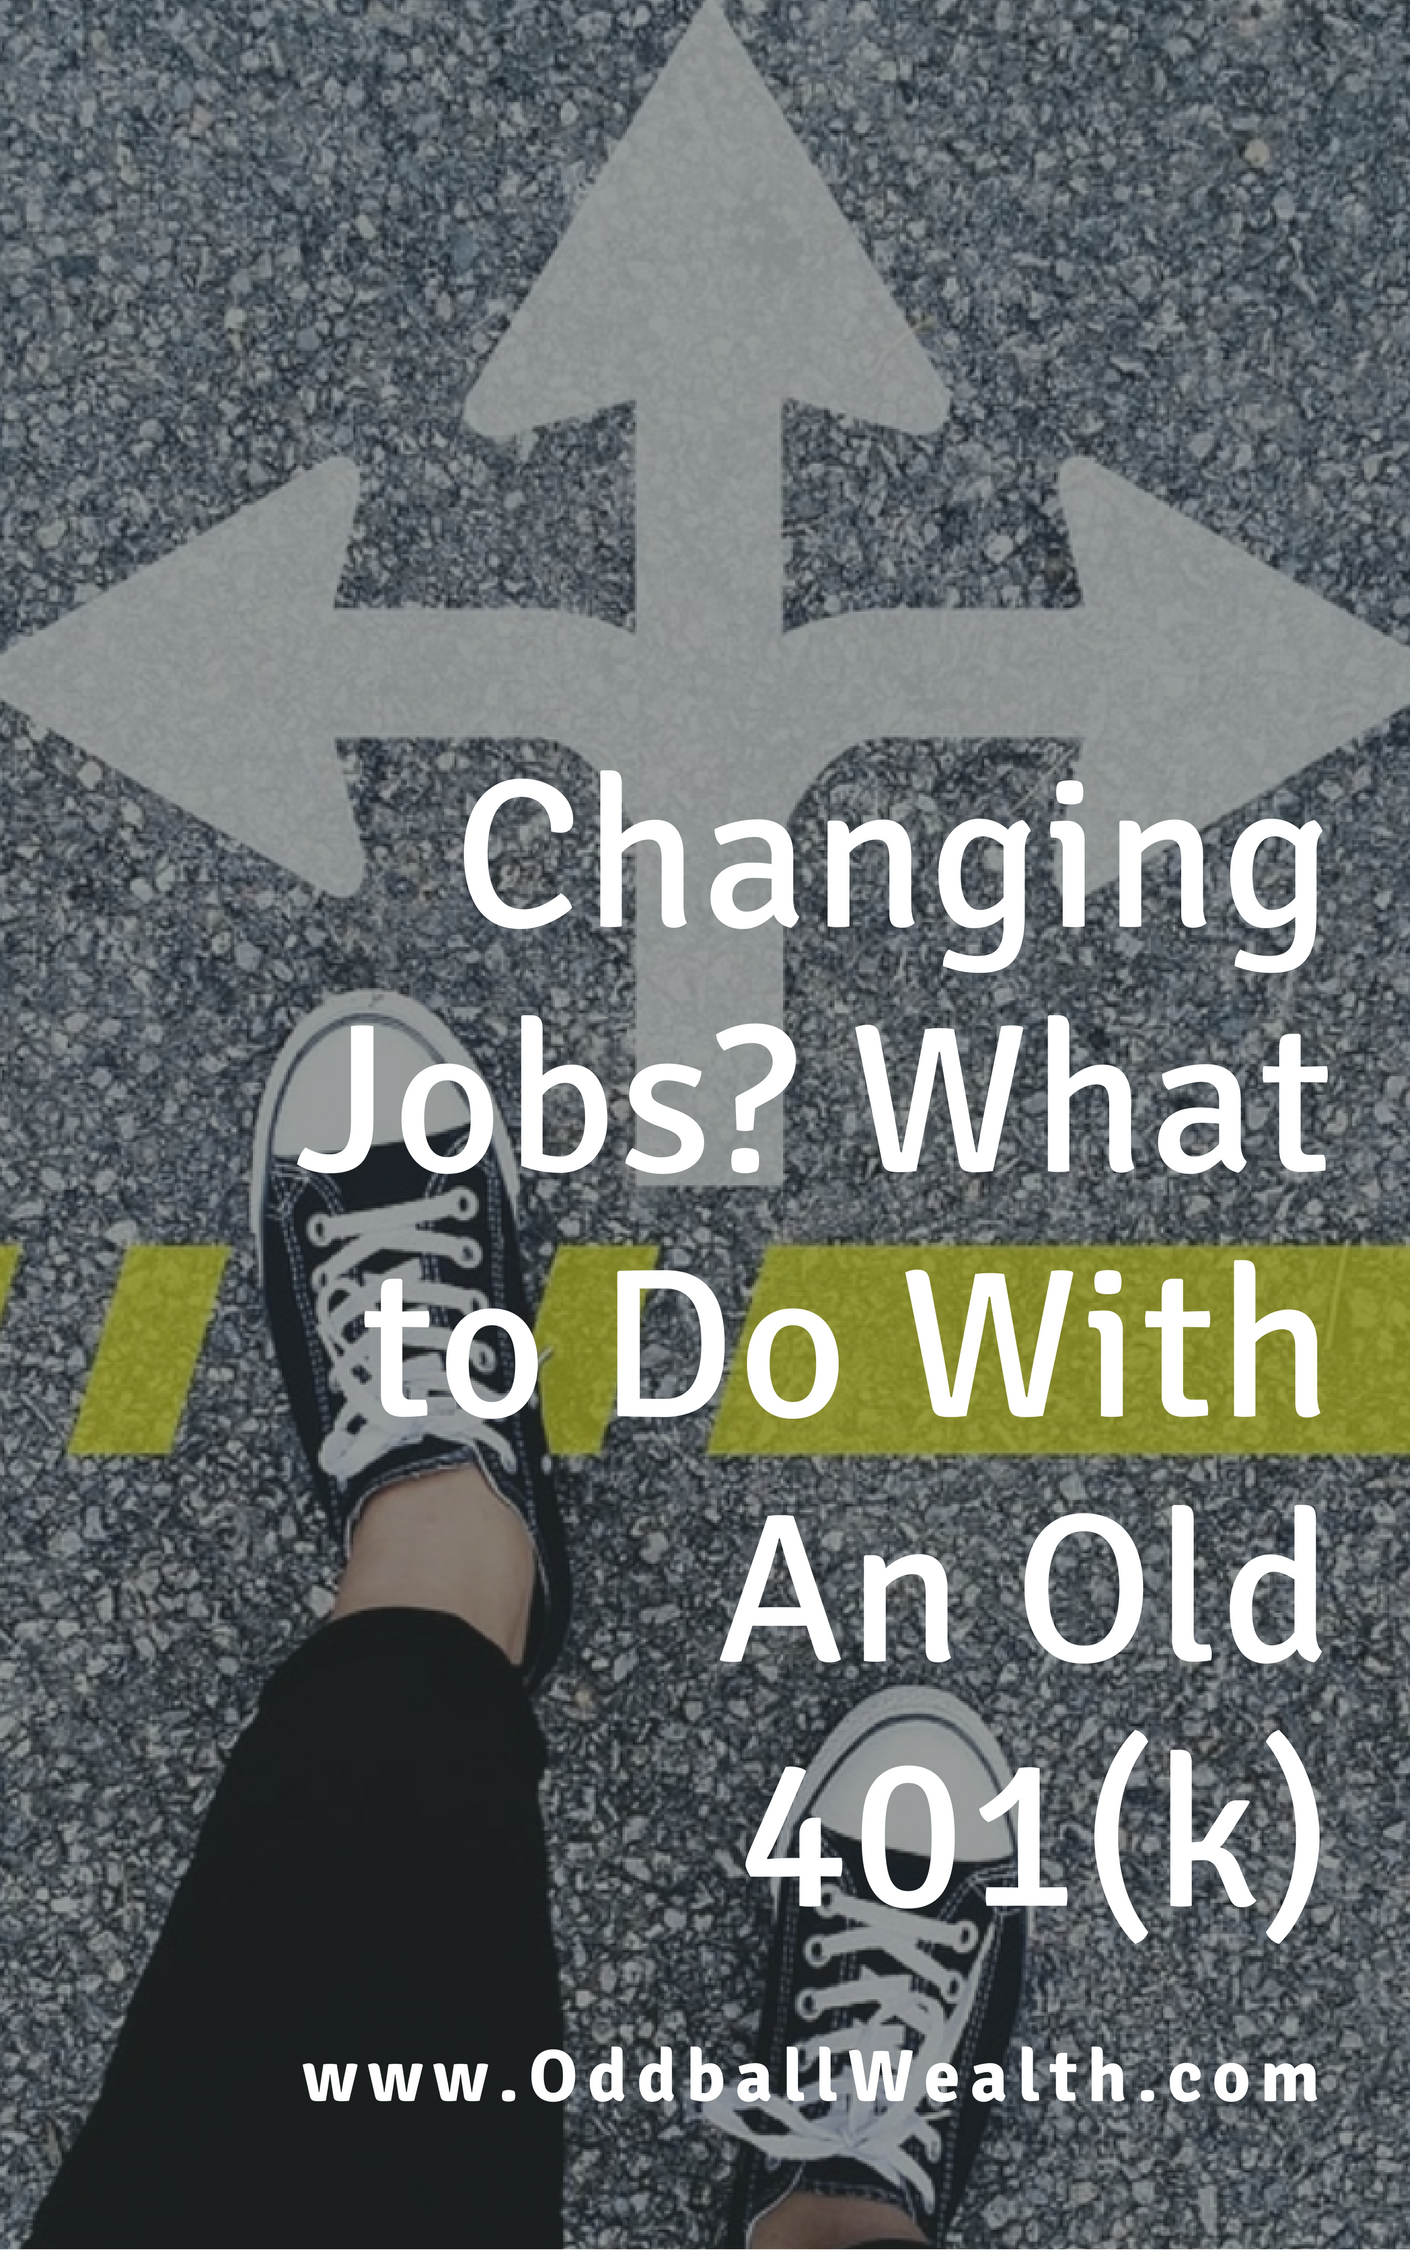 Changing Jobs? What to Do With An Old 401(k)